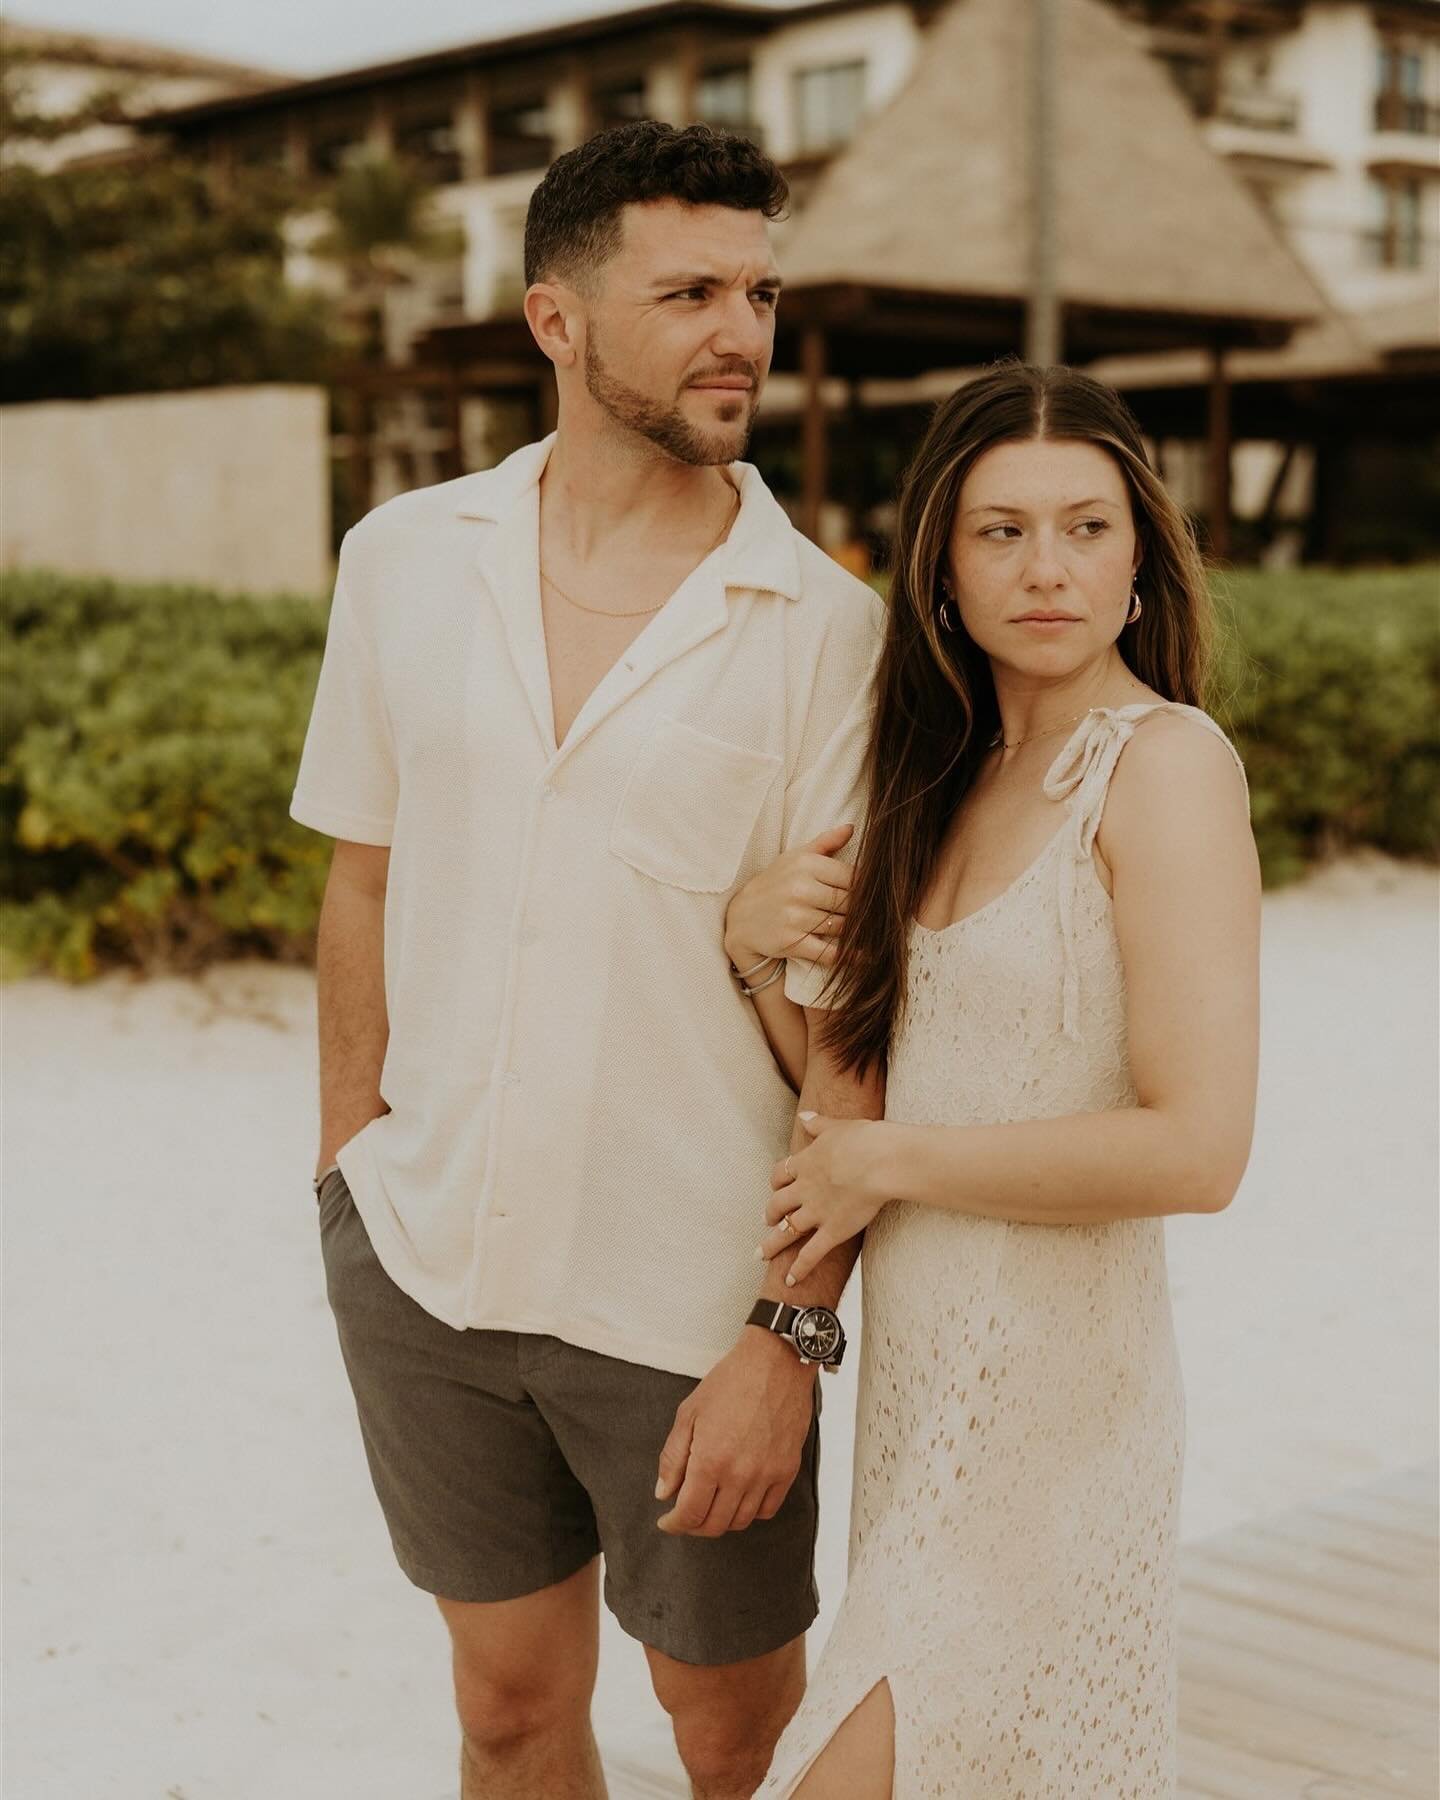 island dreams, let's escape to where there's palm trees + salt air 🏝️
.
.
#lopesancostabavaro #lopesancostabavarowedding #puntacanawedding #puntacanaresort #puntacanaengagement #destinationweddingphotographer #destinationweddings #beachdestinationwe